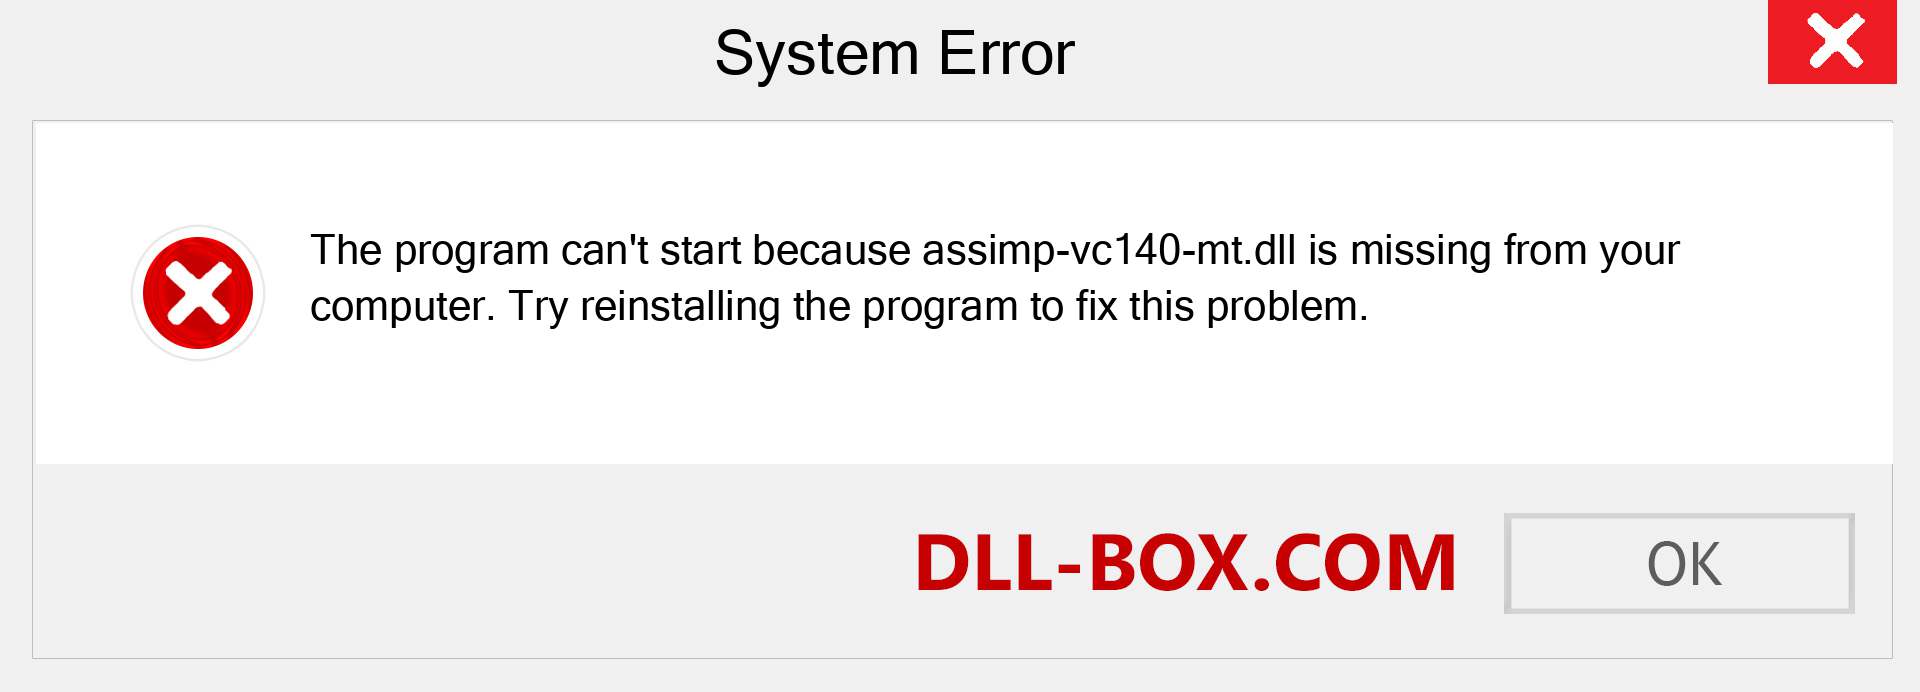  assimp-vc140-mt.dll file is missing?. Download for Windows 7, 8, 10 - Fix  assimp-vc140-mt dll Missing Error on Windows, photos, images